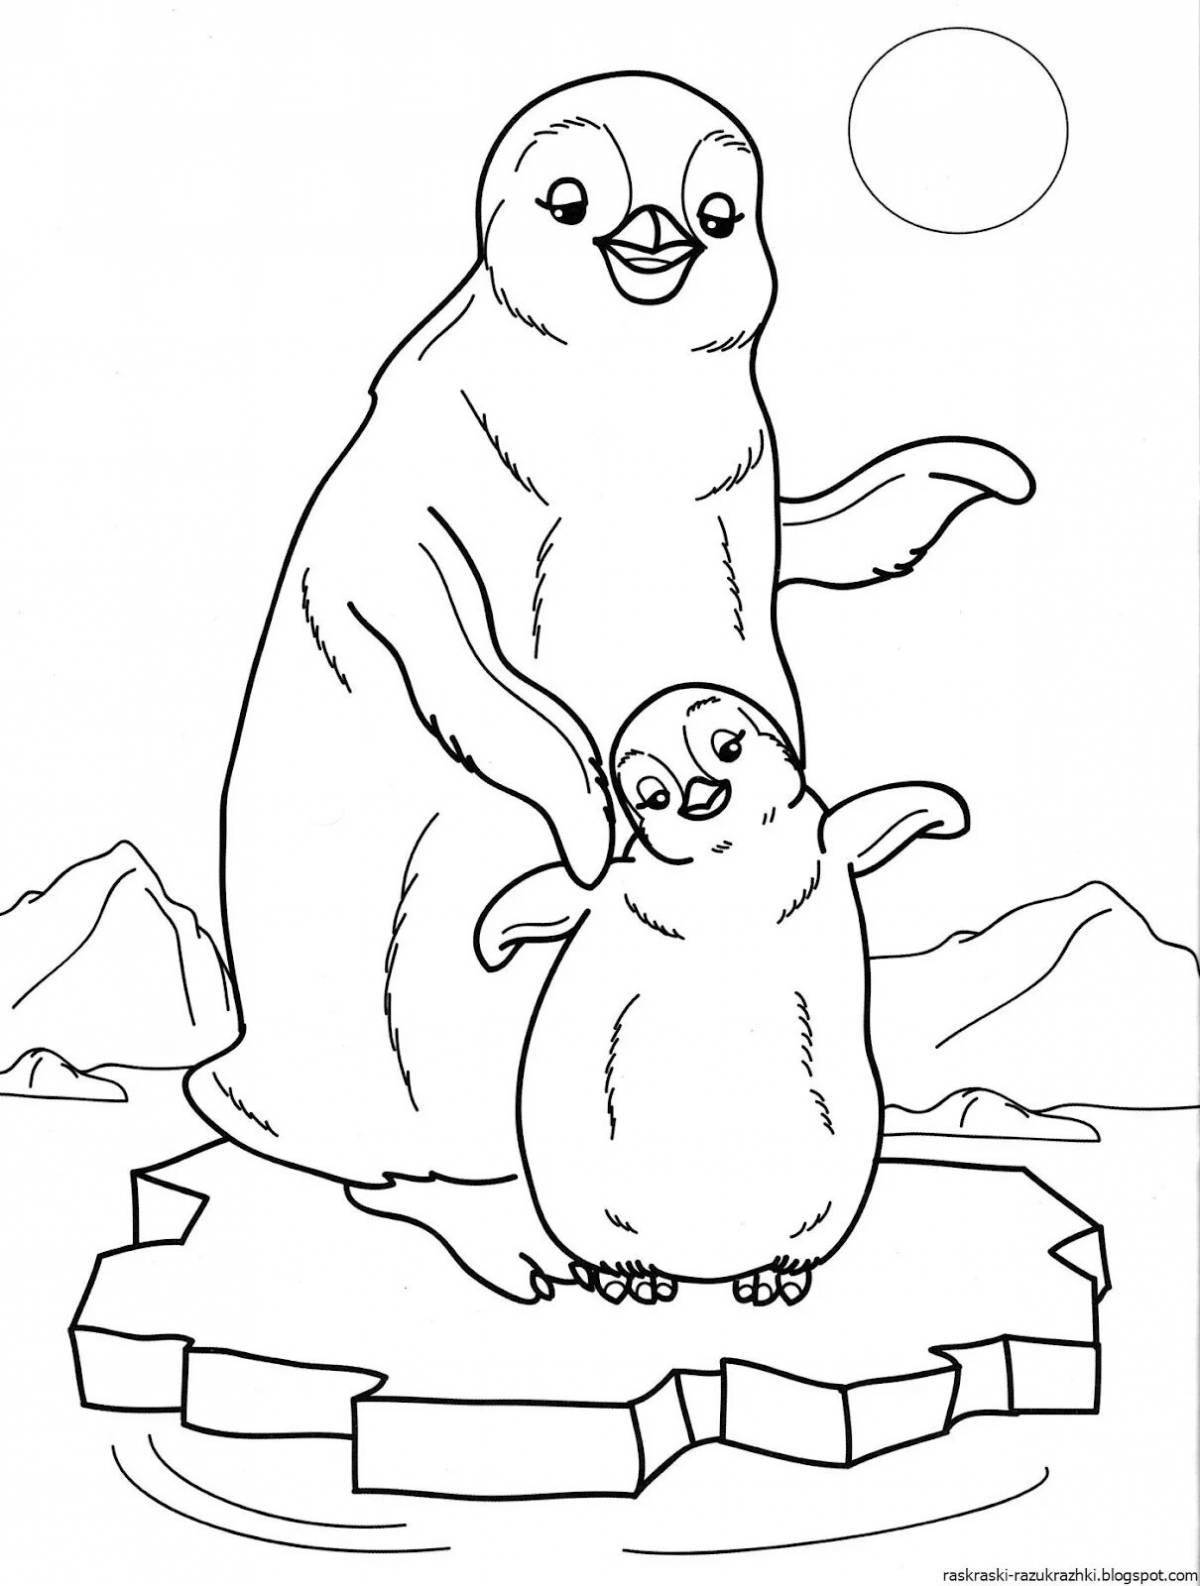 Antarctica incredible animals coloring pages for kids